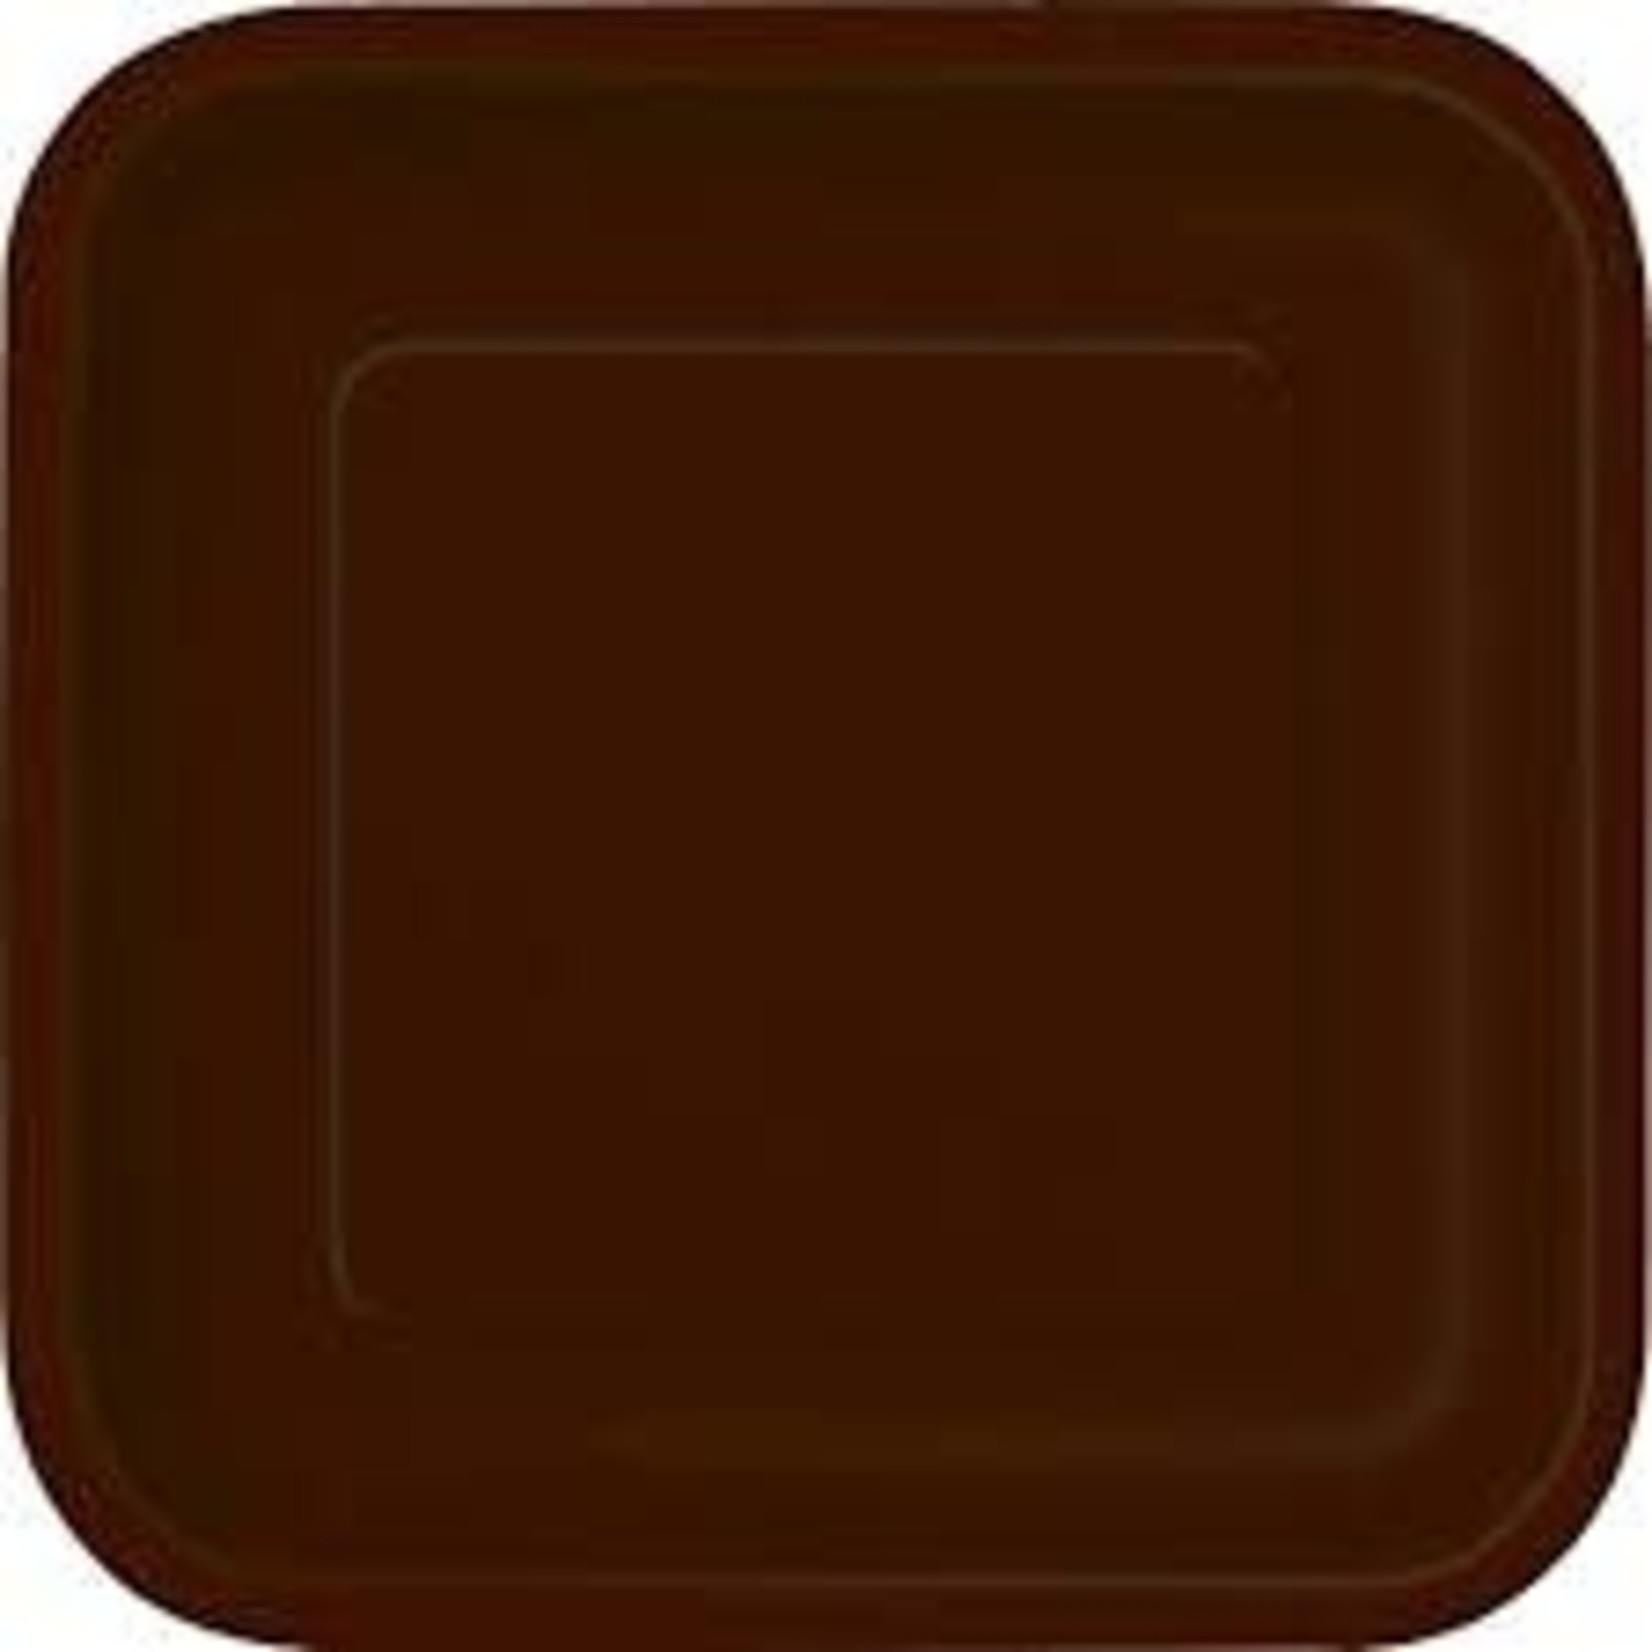 Brown Squared Plates 14ct